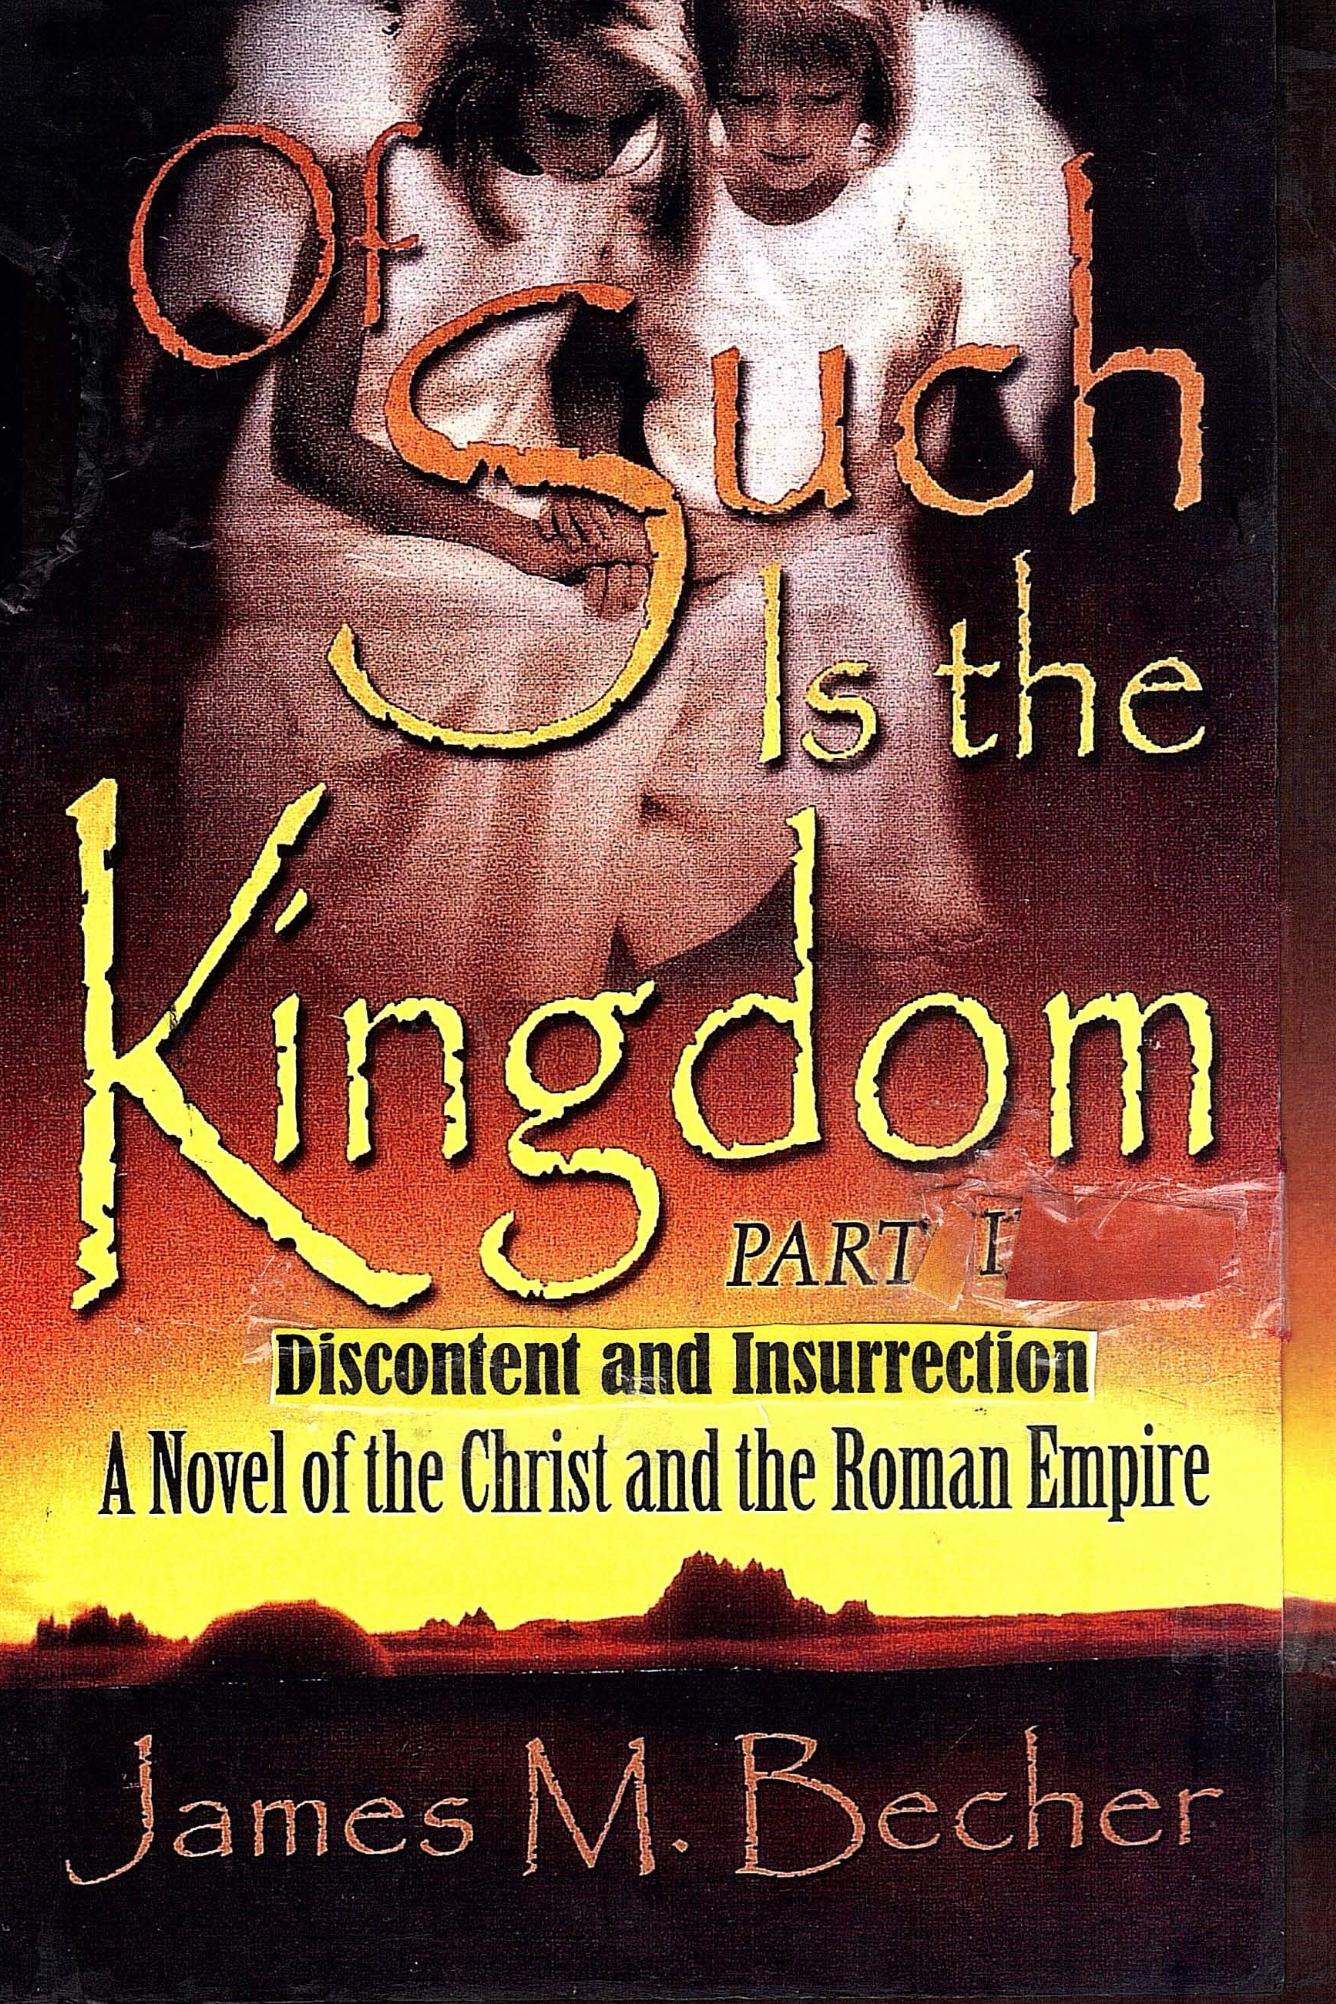 FREE: Of Such Is The Kingdom, Part I, Discontent and Insurrection, A Novel of the Christ and the Roman Empire by James M.Becher